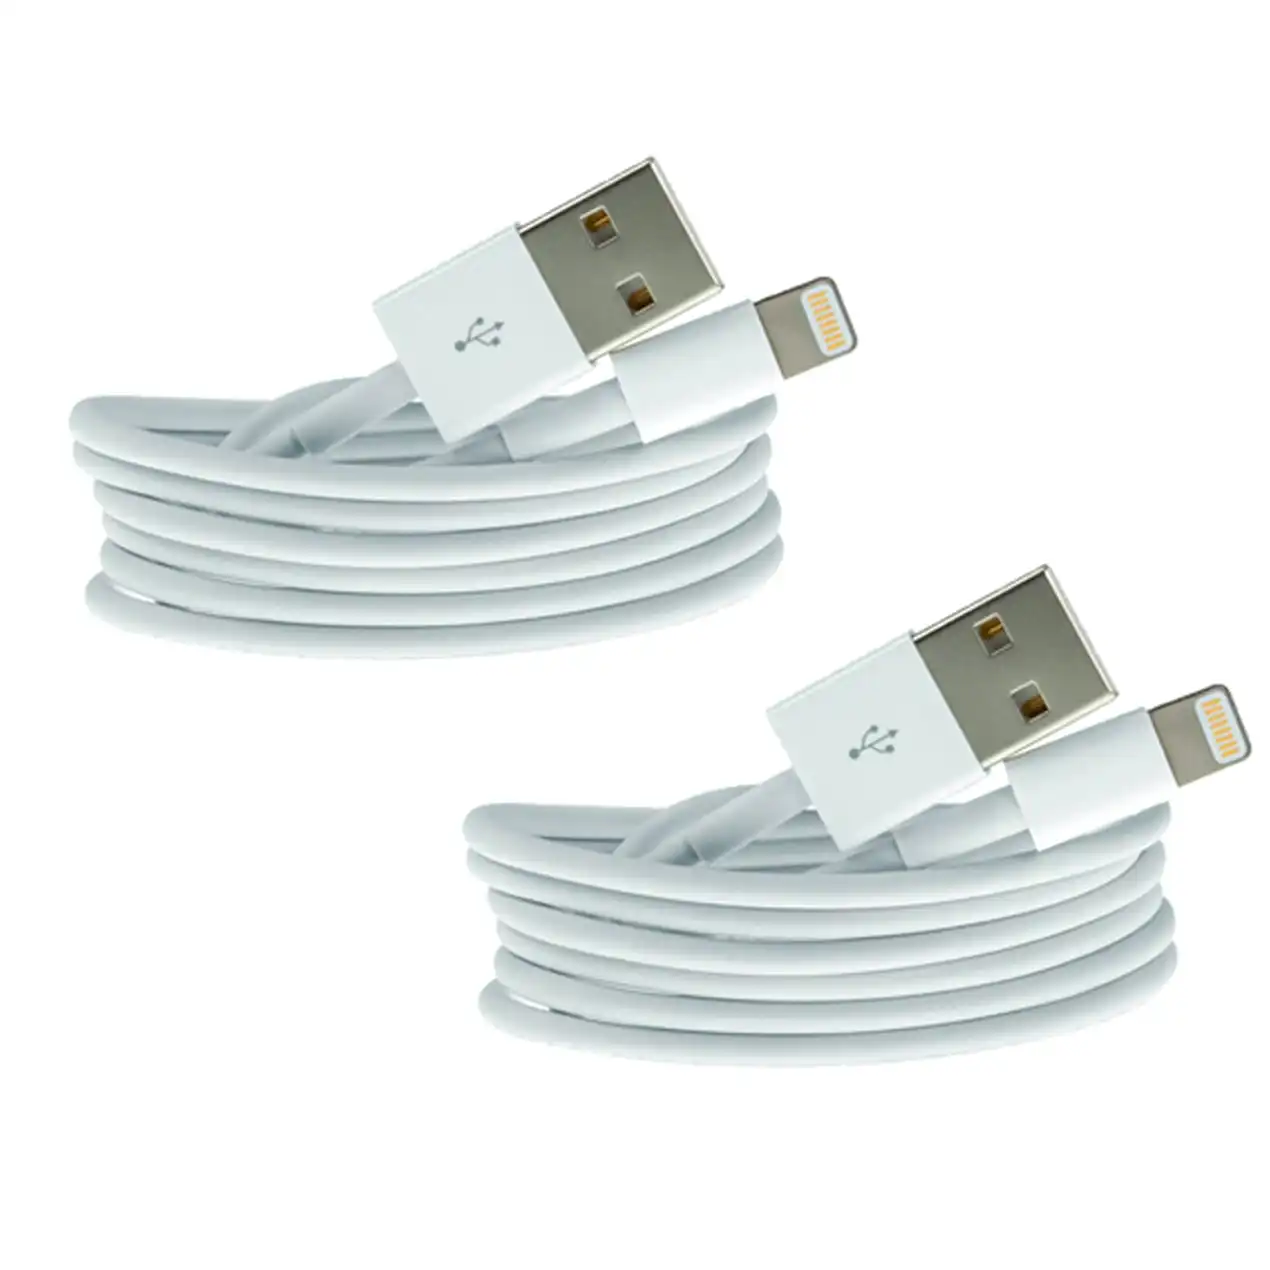 TODO 2Pc 1M Usb Data Charge Cable Lightning Pin Connector For Apple Iphone Ipad